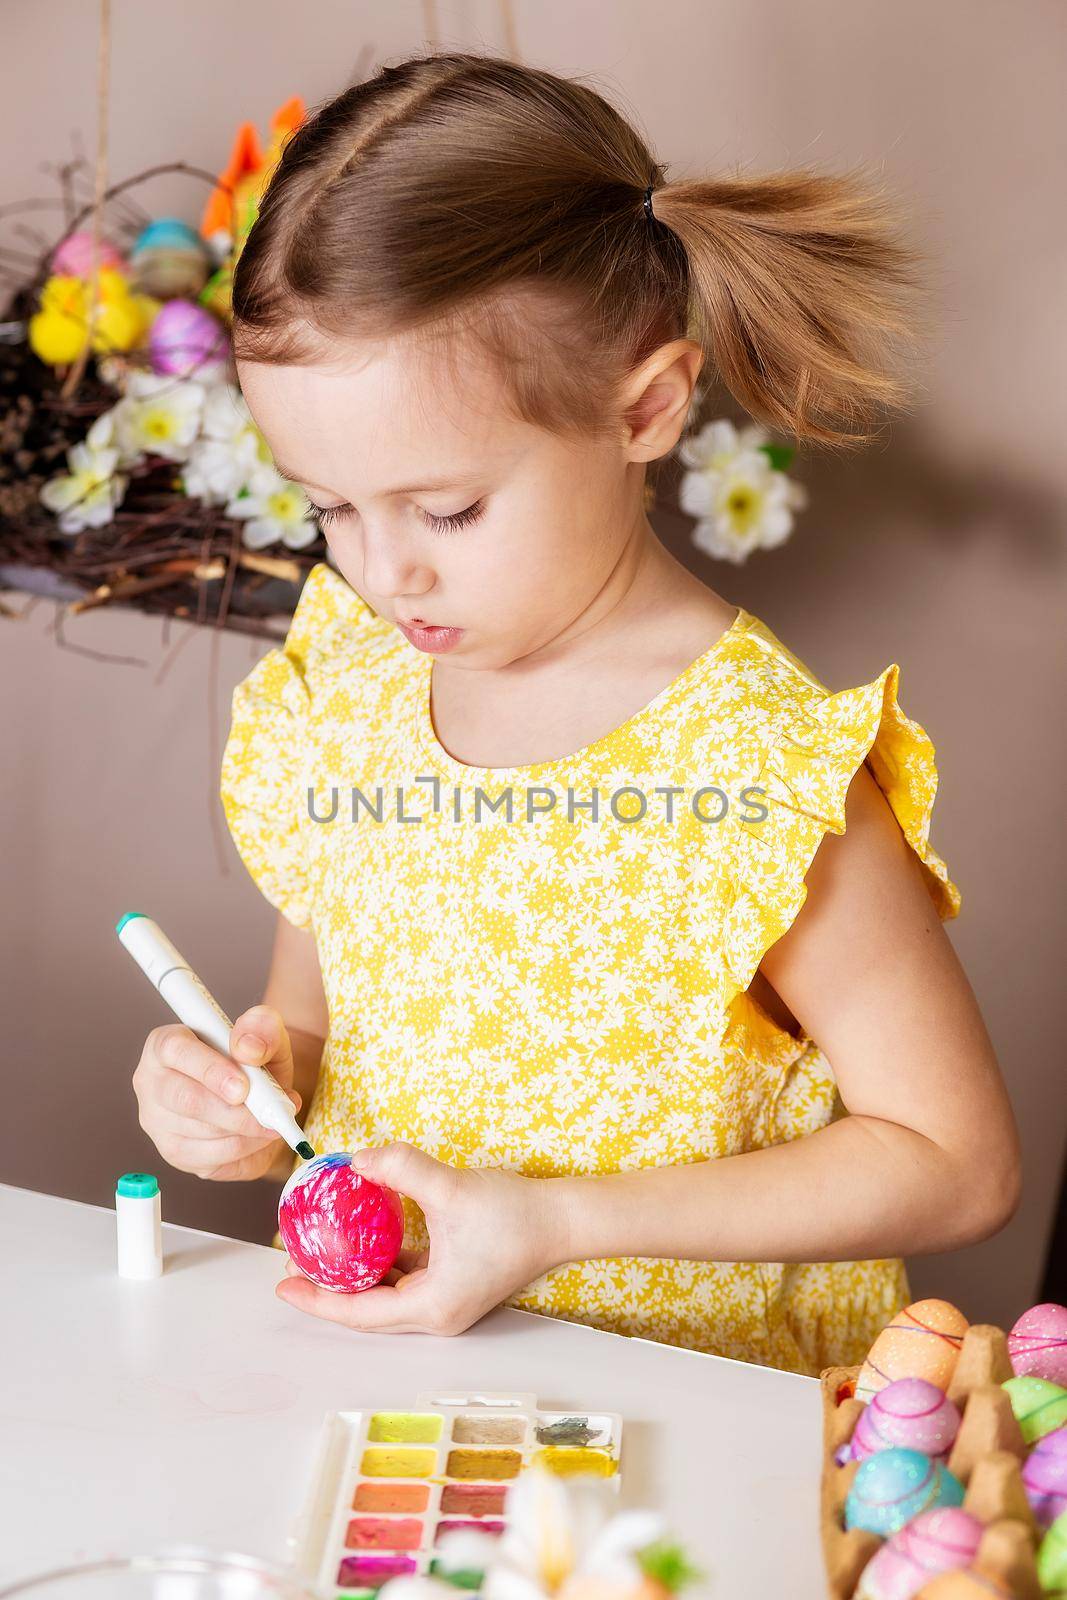 A small girl of 5 years old paints eggs with special markers for Easter. by galinasharapova